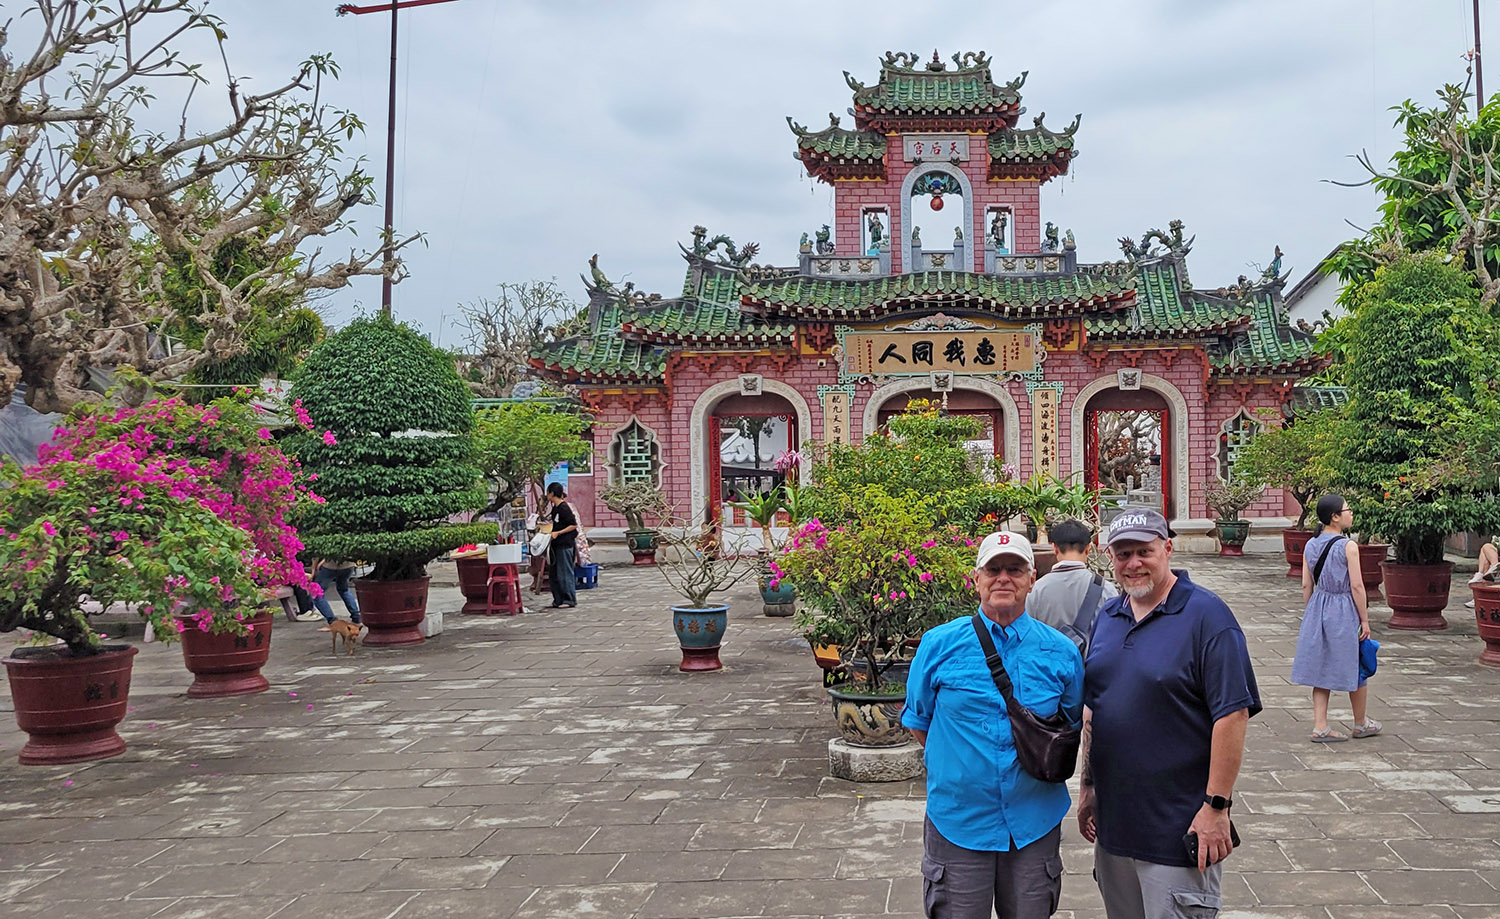 Two men standing in front of the gate to the Fujian Assembly Hall in Hoi An, Vietnam